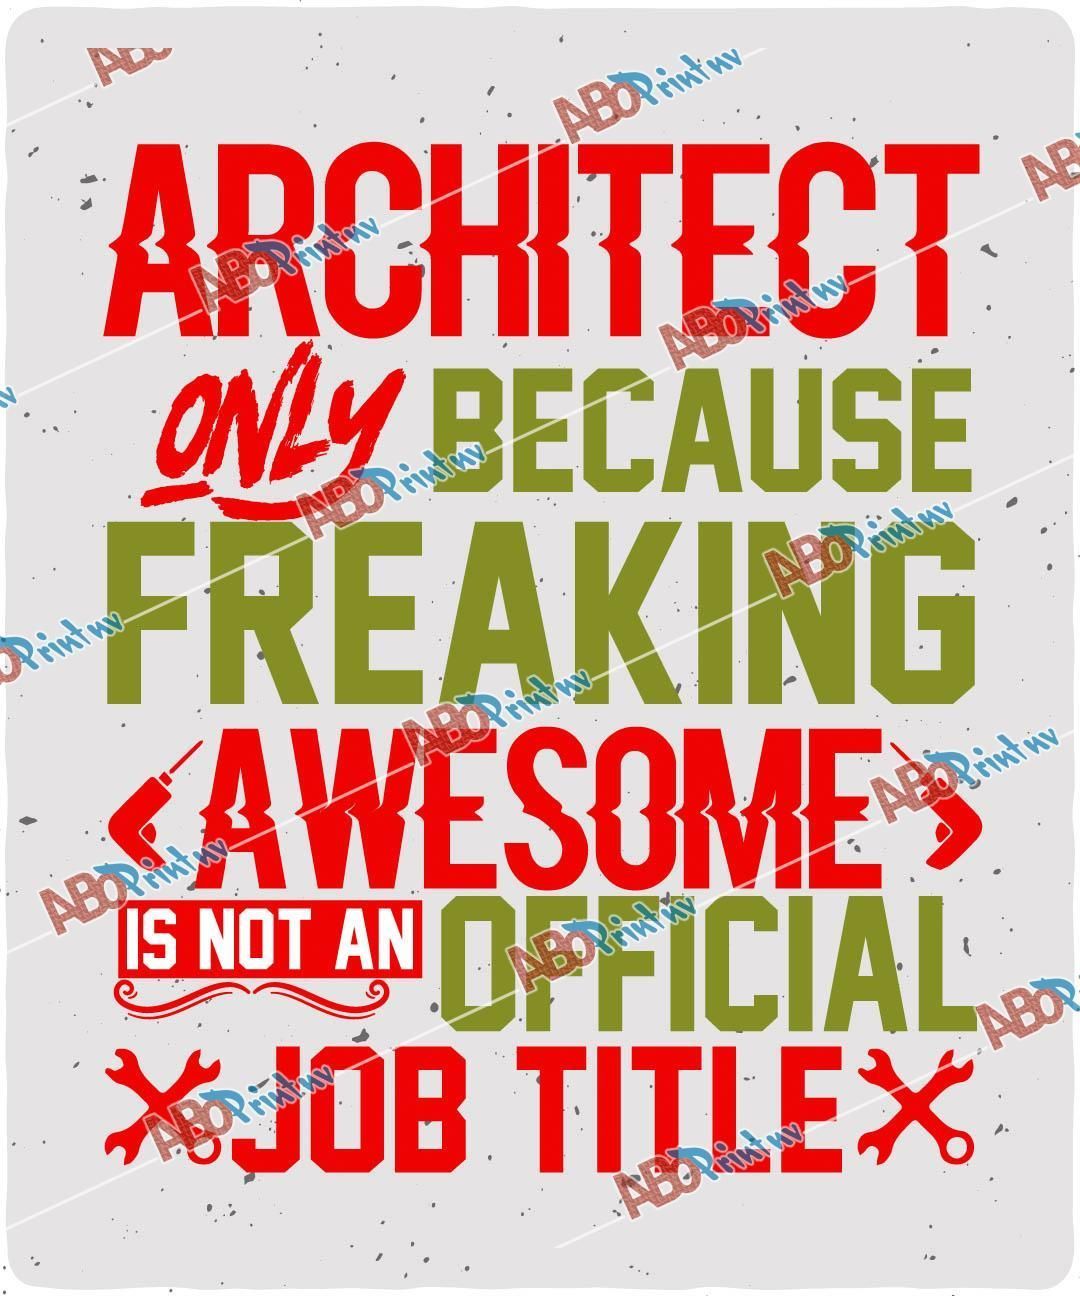 Architect only because freaking awesome.jpg